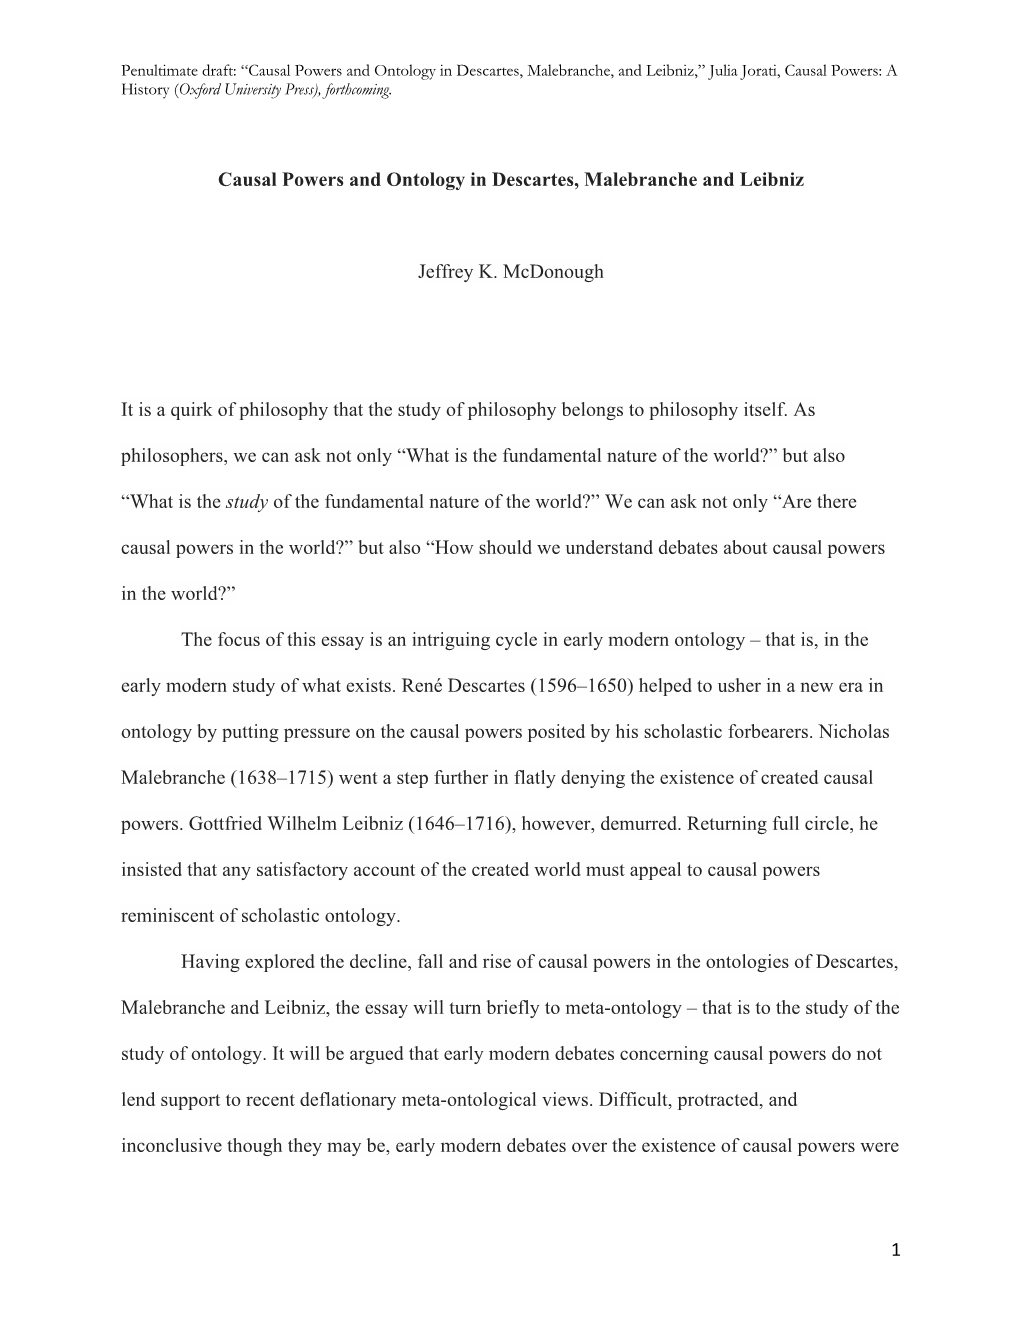 Penultimate Draft: “Causal Powers and Ontology in Descartes, Malebranche, and Leibniz,” Julia Jorati, Causal Powers: a History (Oxford University Press), Forthcoming